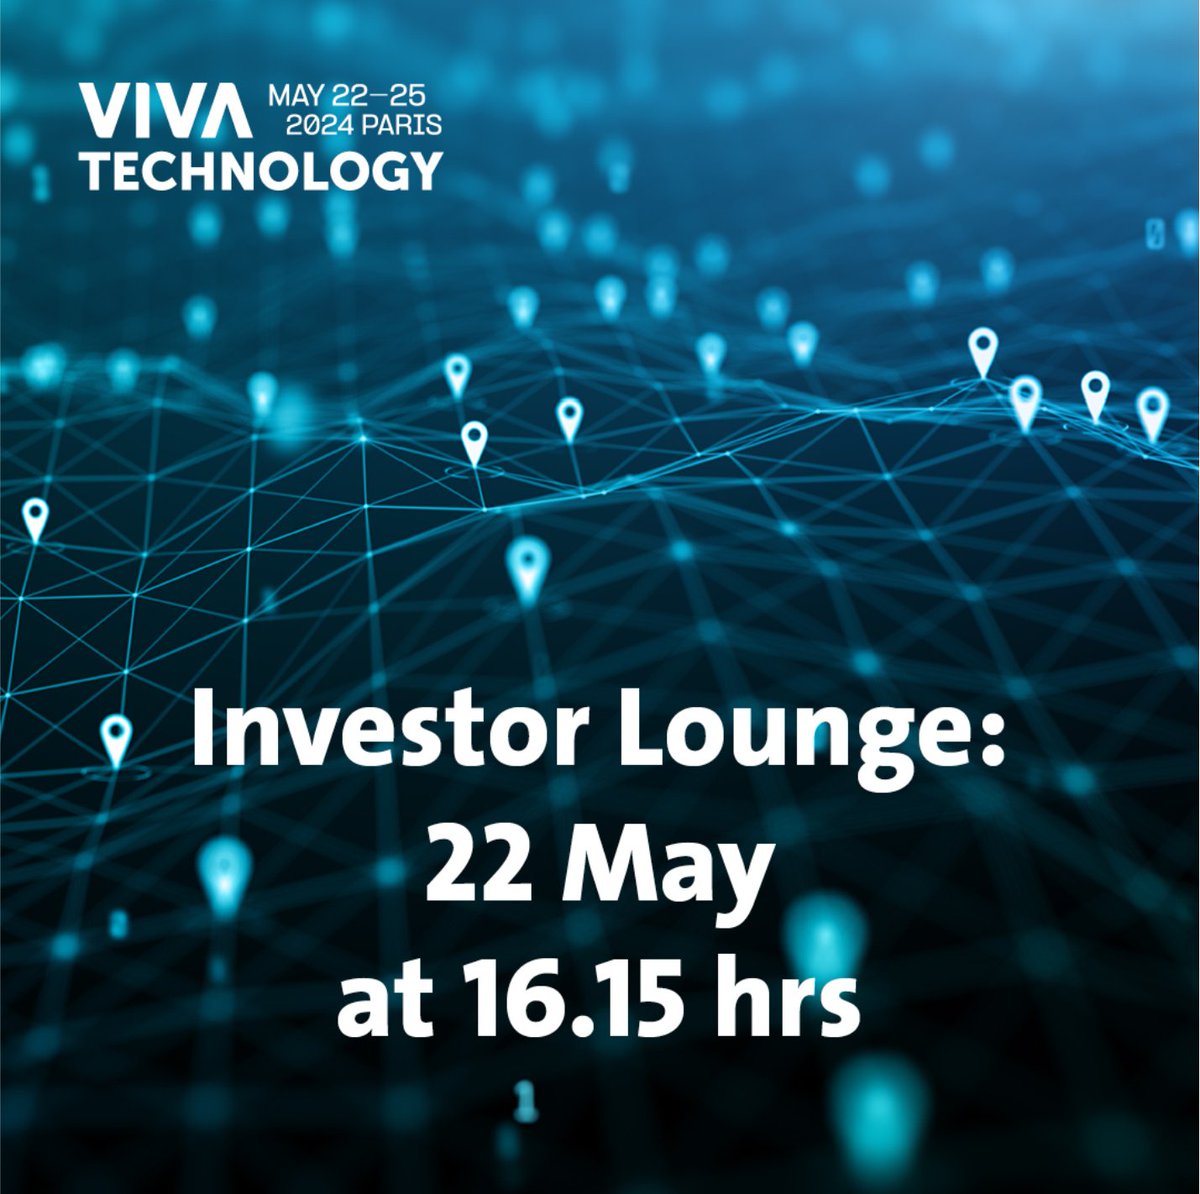 Seeking the perfect deeptech investment? Join @EPOorg at #VivaTech this year! 🎉 Swing by the Investor Lounge on May 22 to discover @EPOorg’s game-changing 'matchmaker' service for investors and #startups: the #DeepTechFinder - kicking off at 4:15pm. See you there! 😉